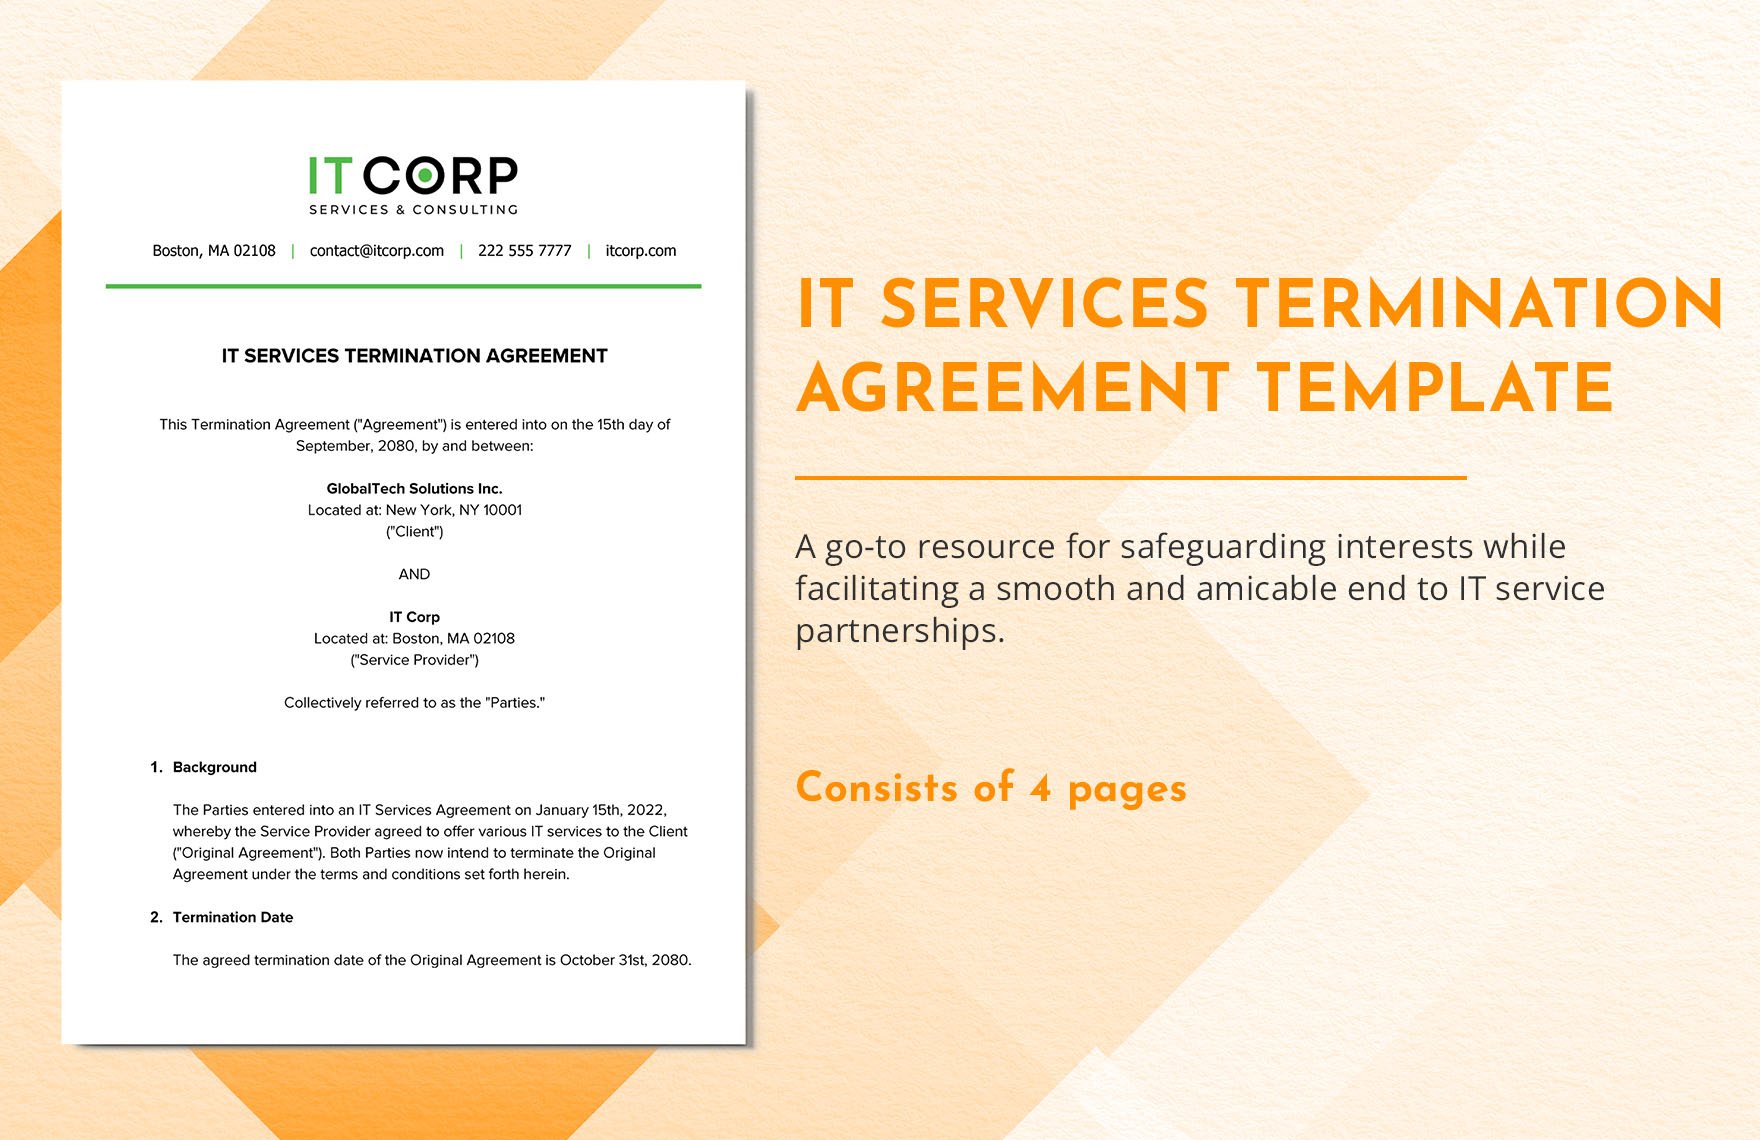 IT Services Termination Agreement Template